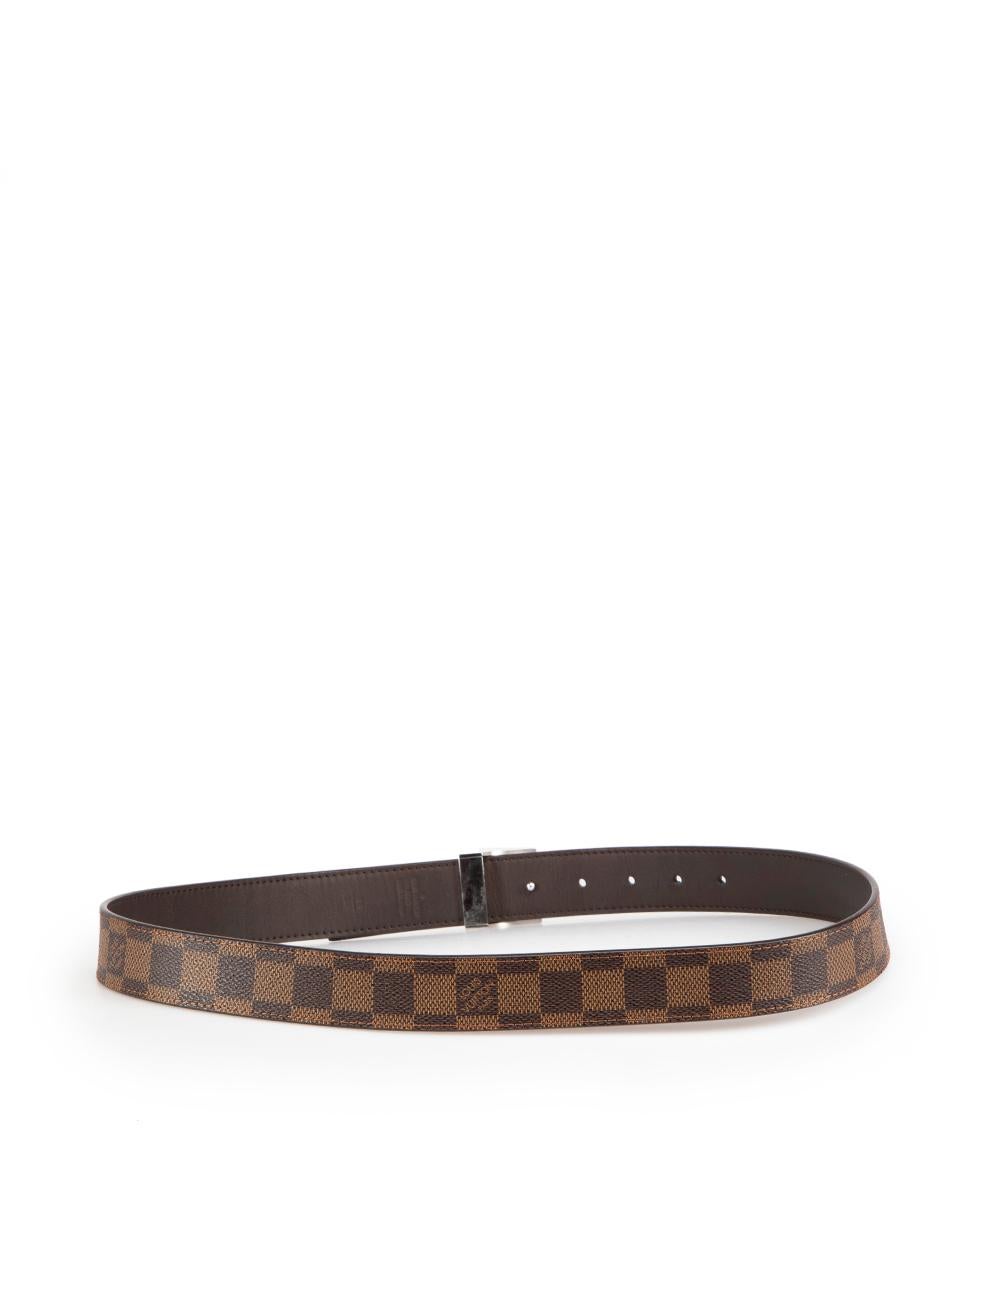 Louis Vuitton Brown Damier Ebene Belt In Good Condition For Sale In London, GB